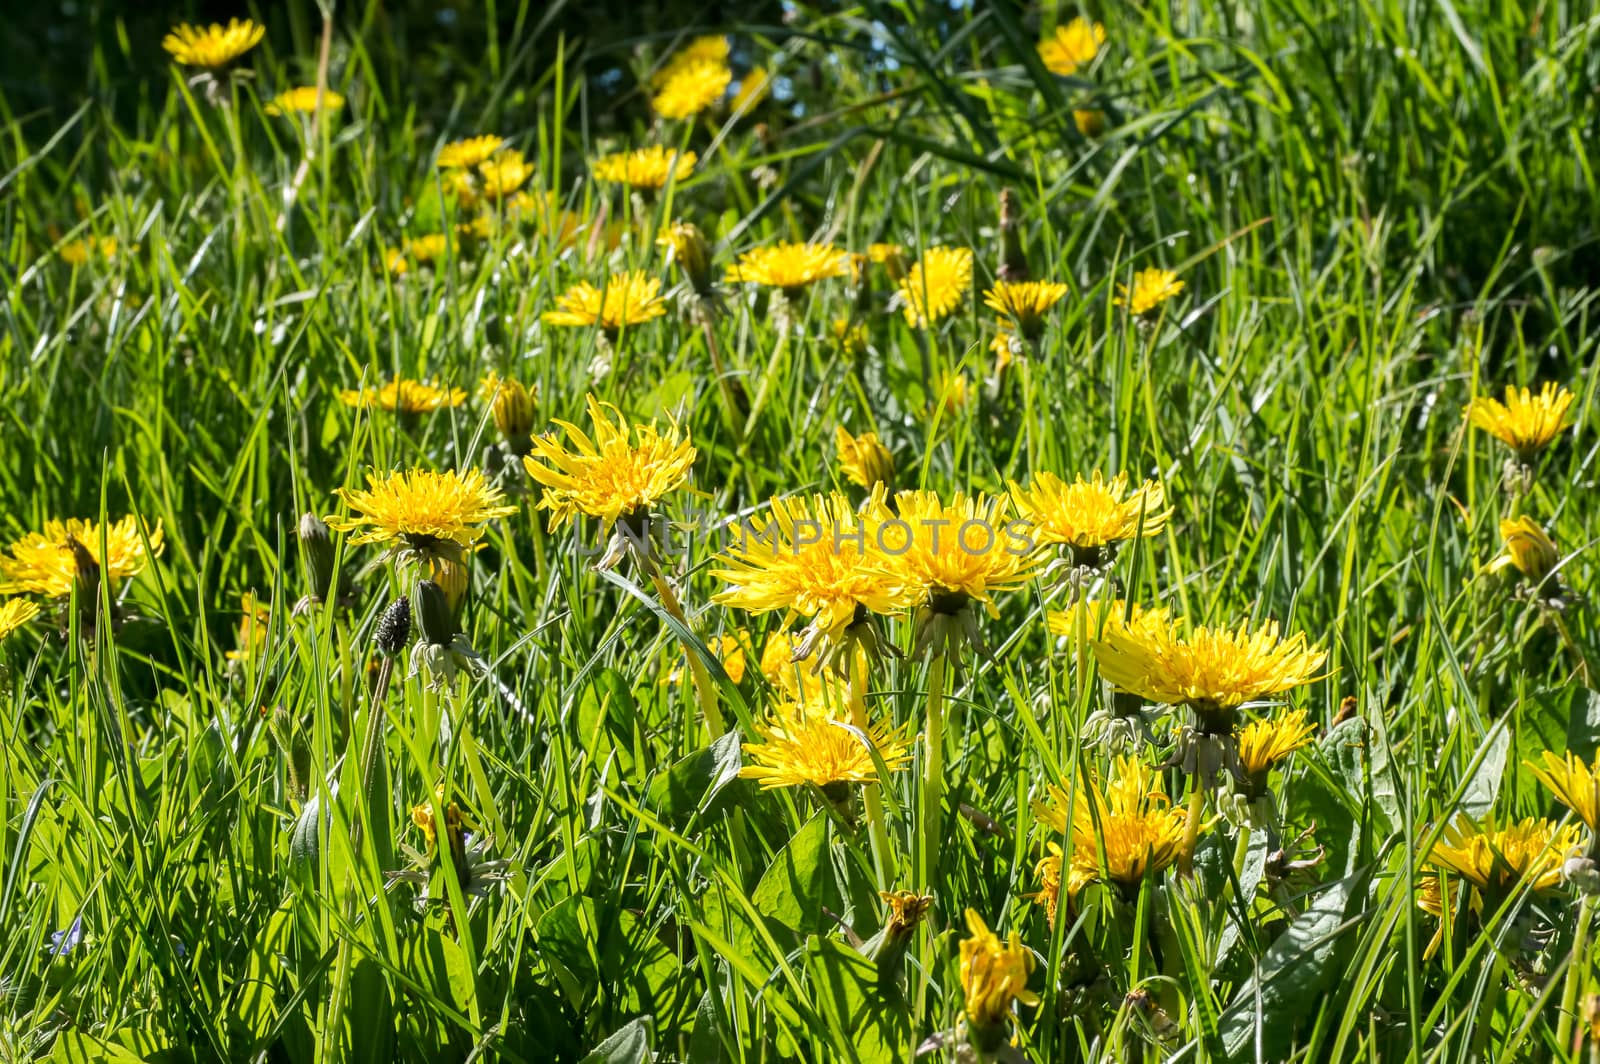 Dandelions growing wild on a sunny day